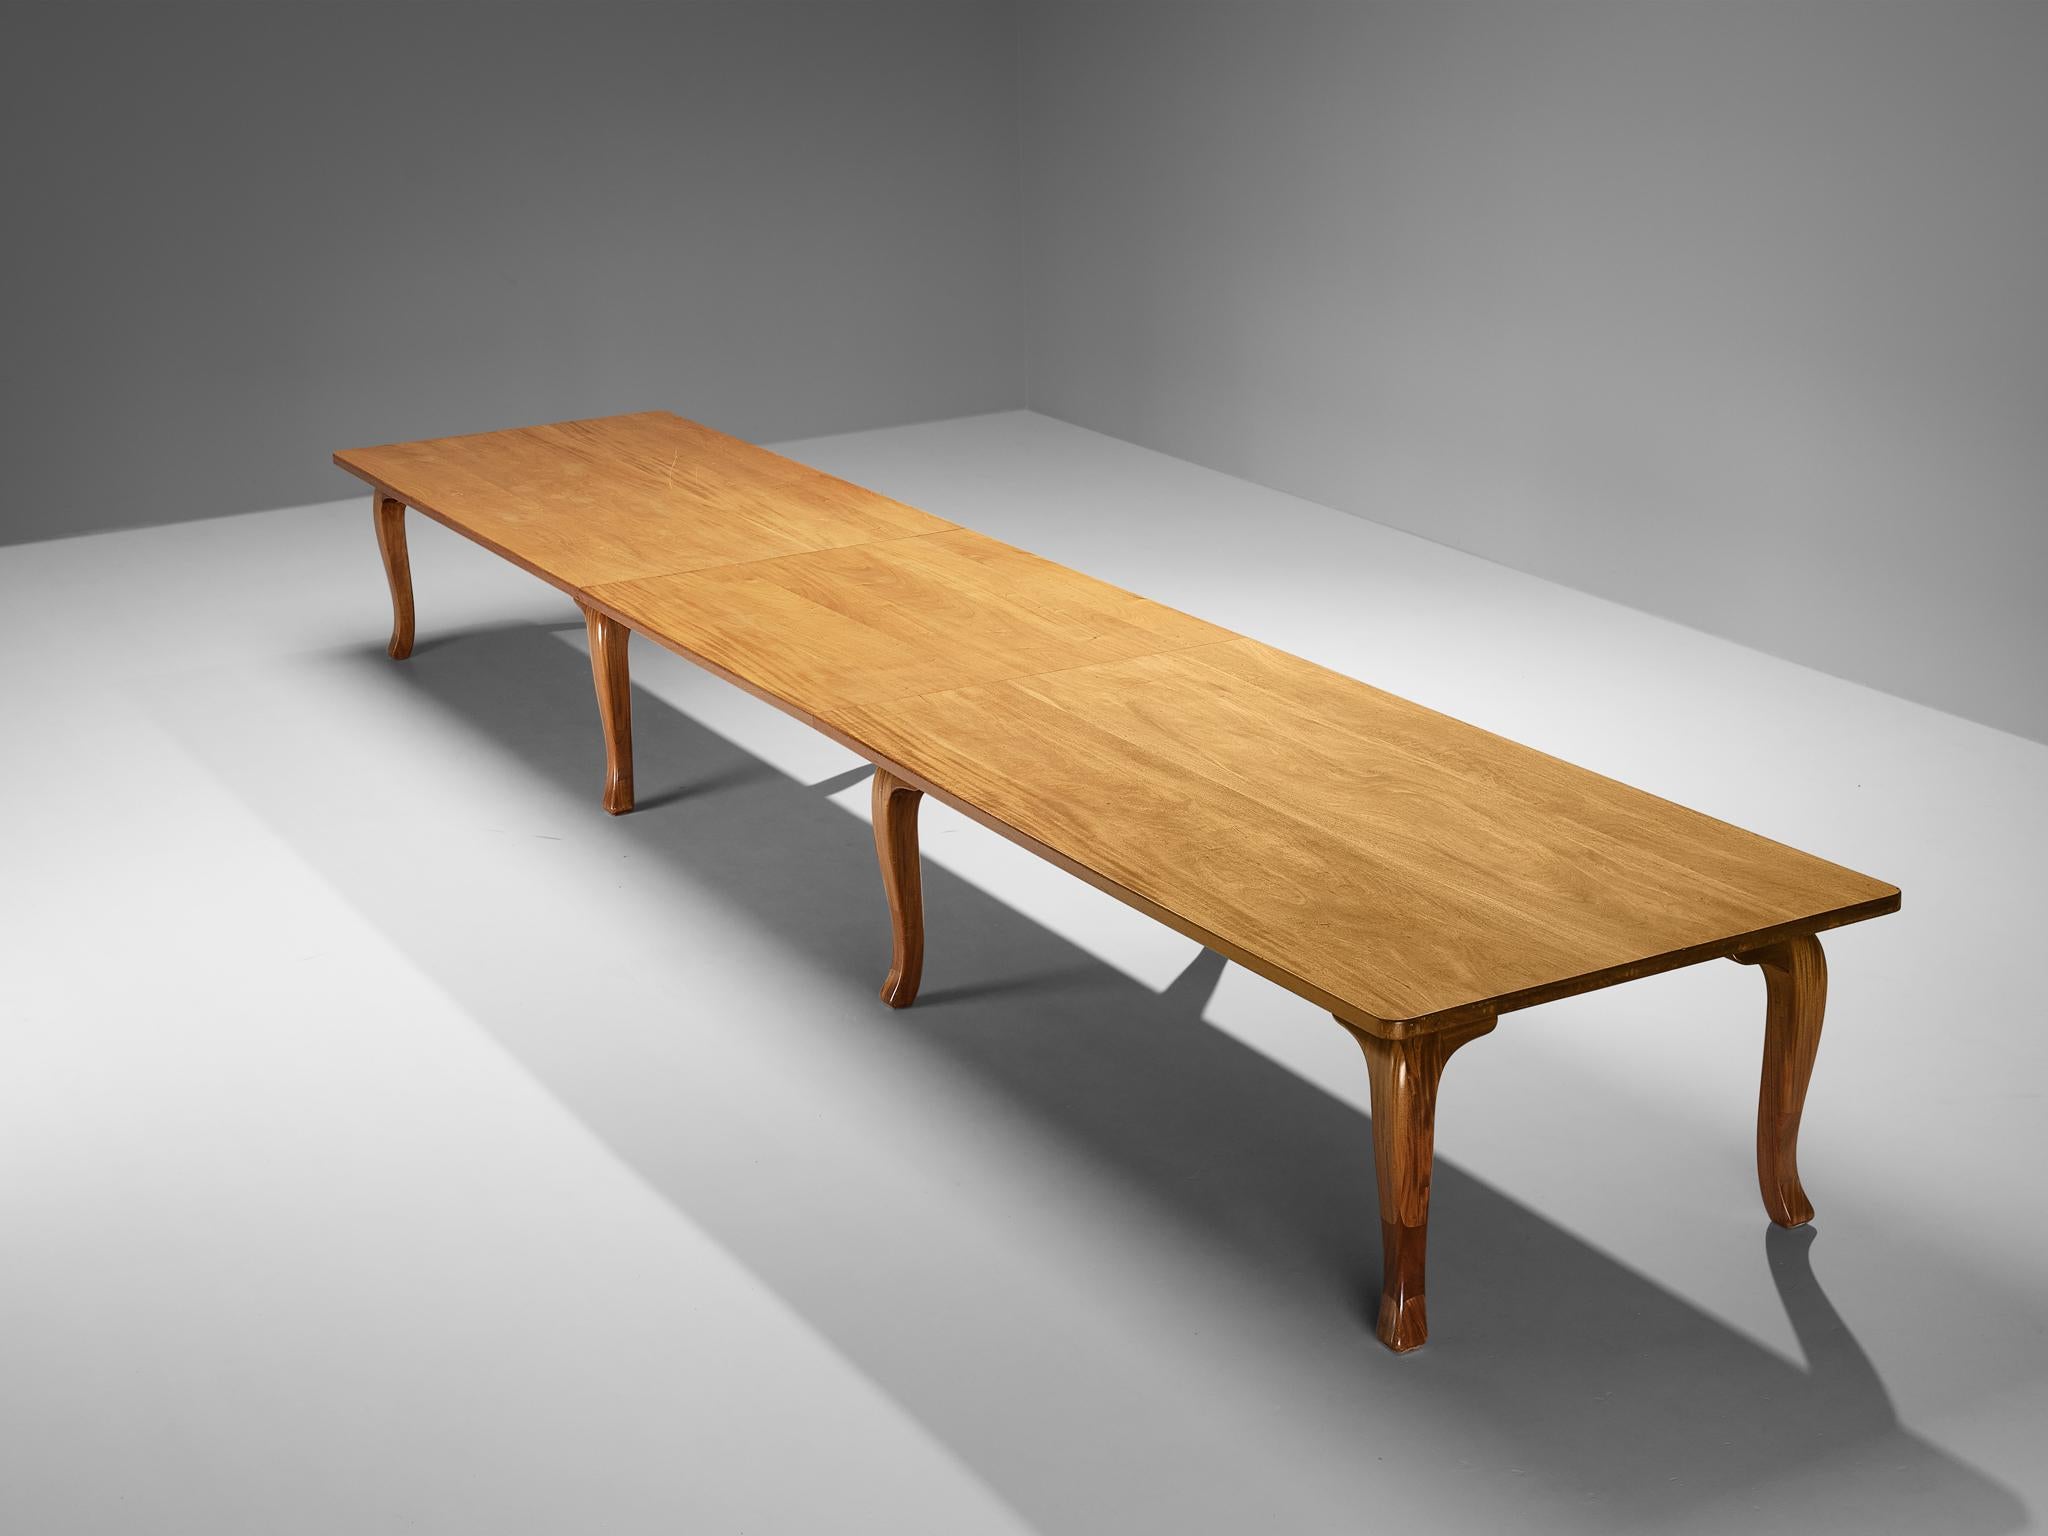 Dining or conference table, stained mahogany, pine underside, Denmark, 1960s

This grandiose table of Danish origin features a tripartite structure defined by clear lines and fine materials. The rectangular-shaped top is held by six elegantly